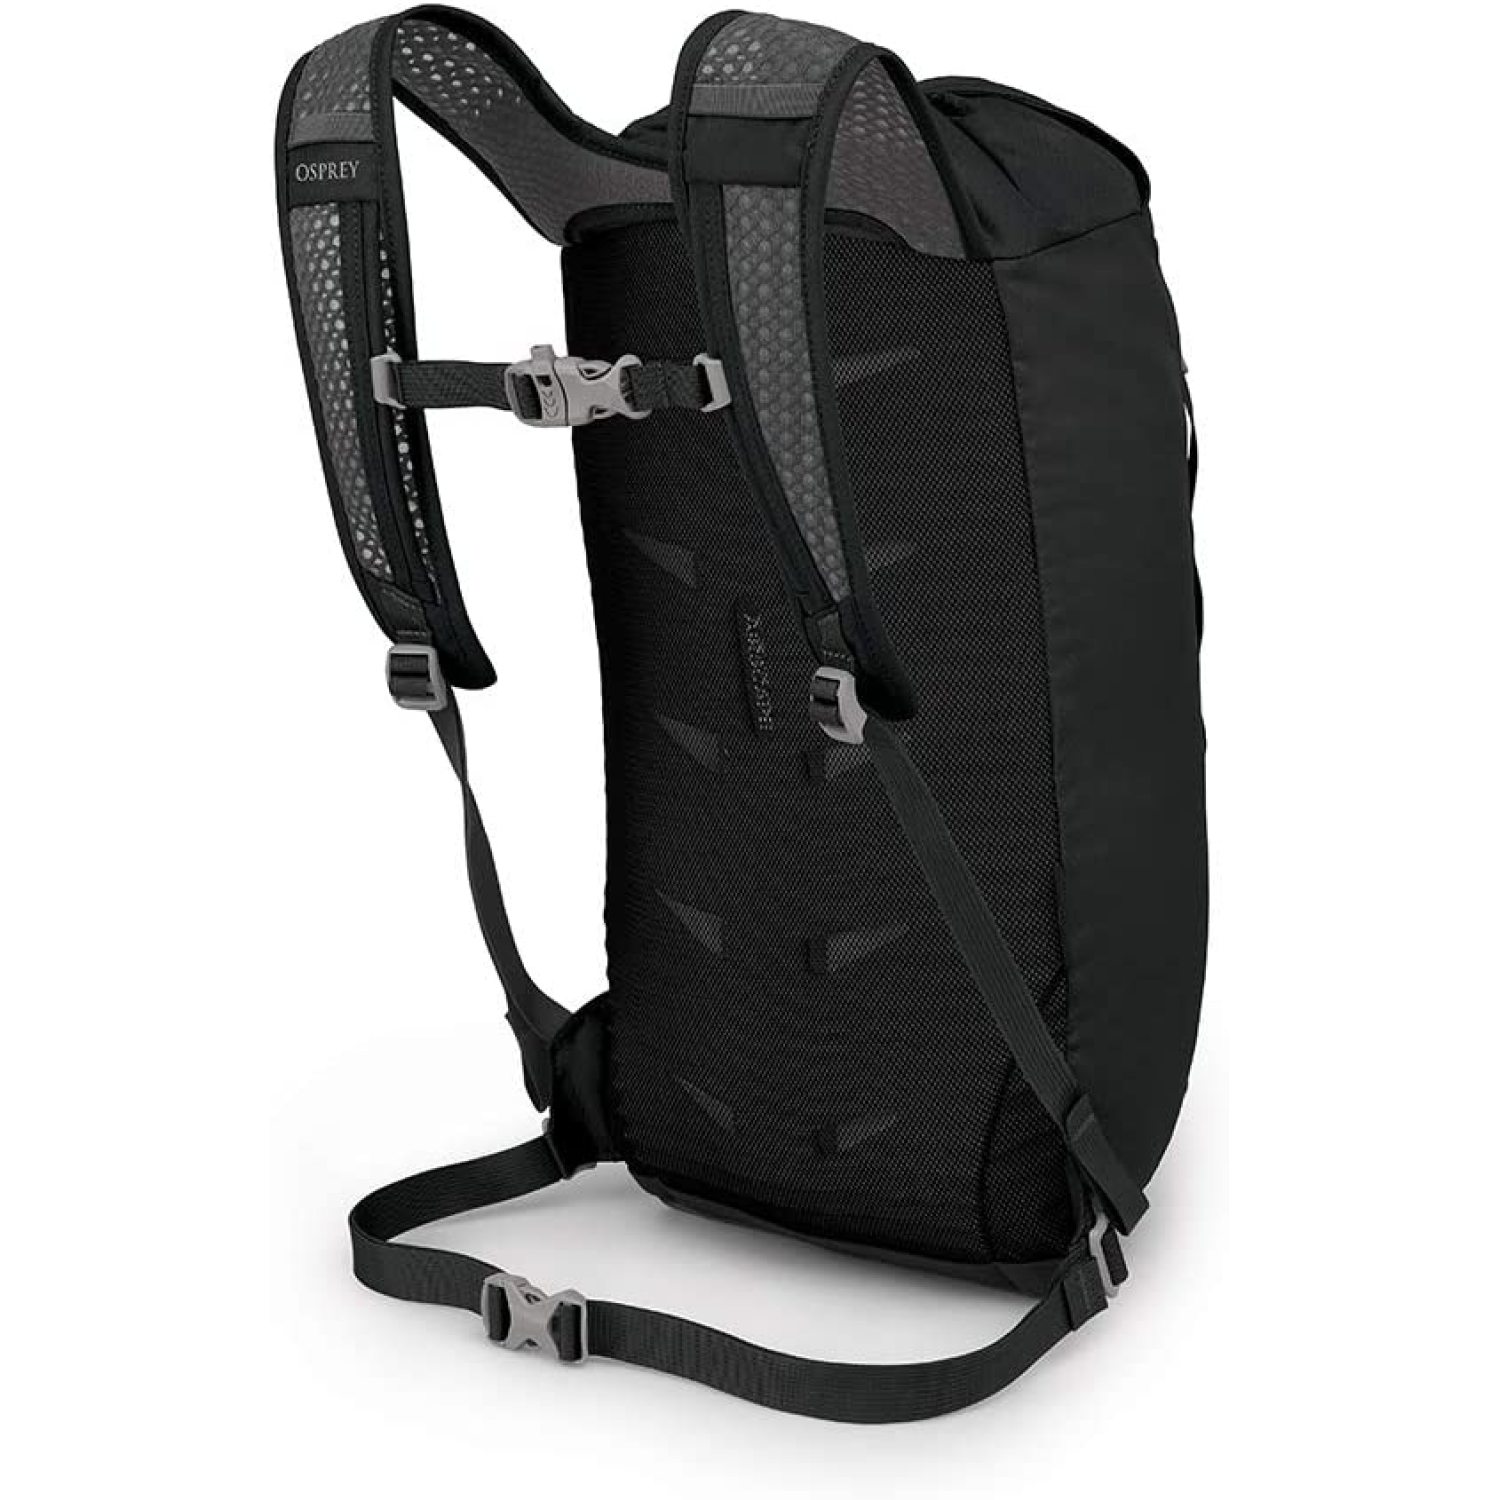 Daylite Cinch Backpack , Black, Top-loading access with cinch closing system - image 2 of 7